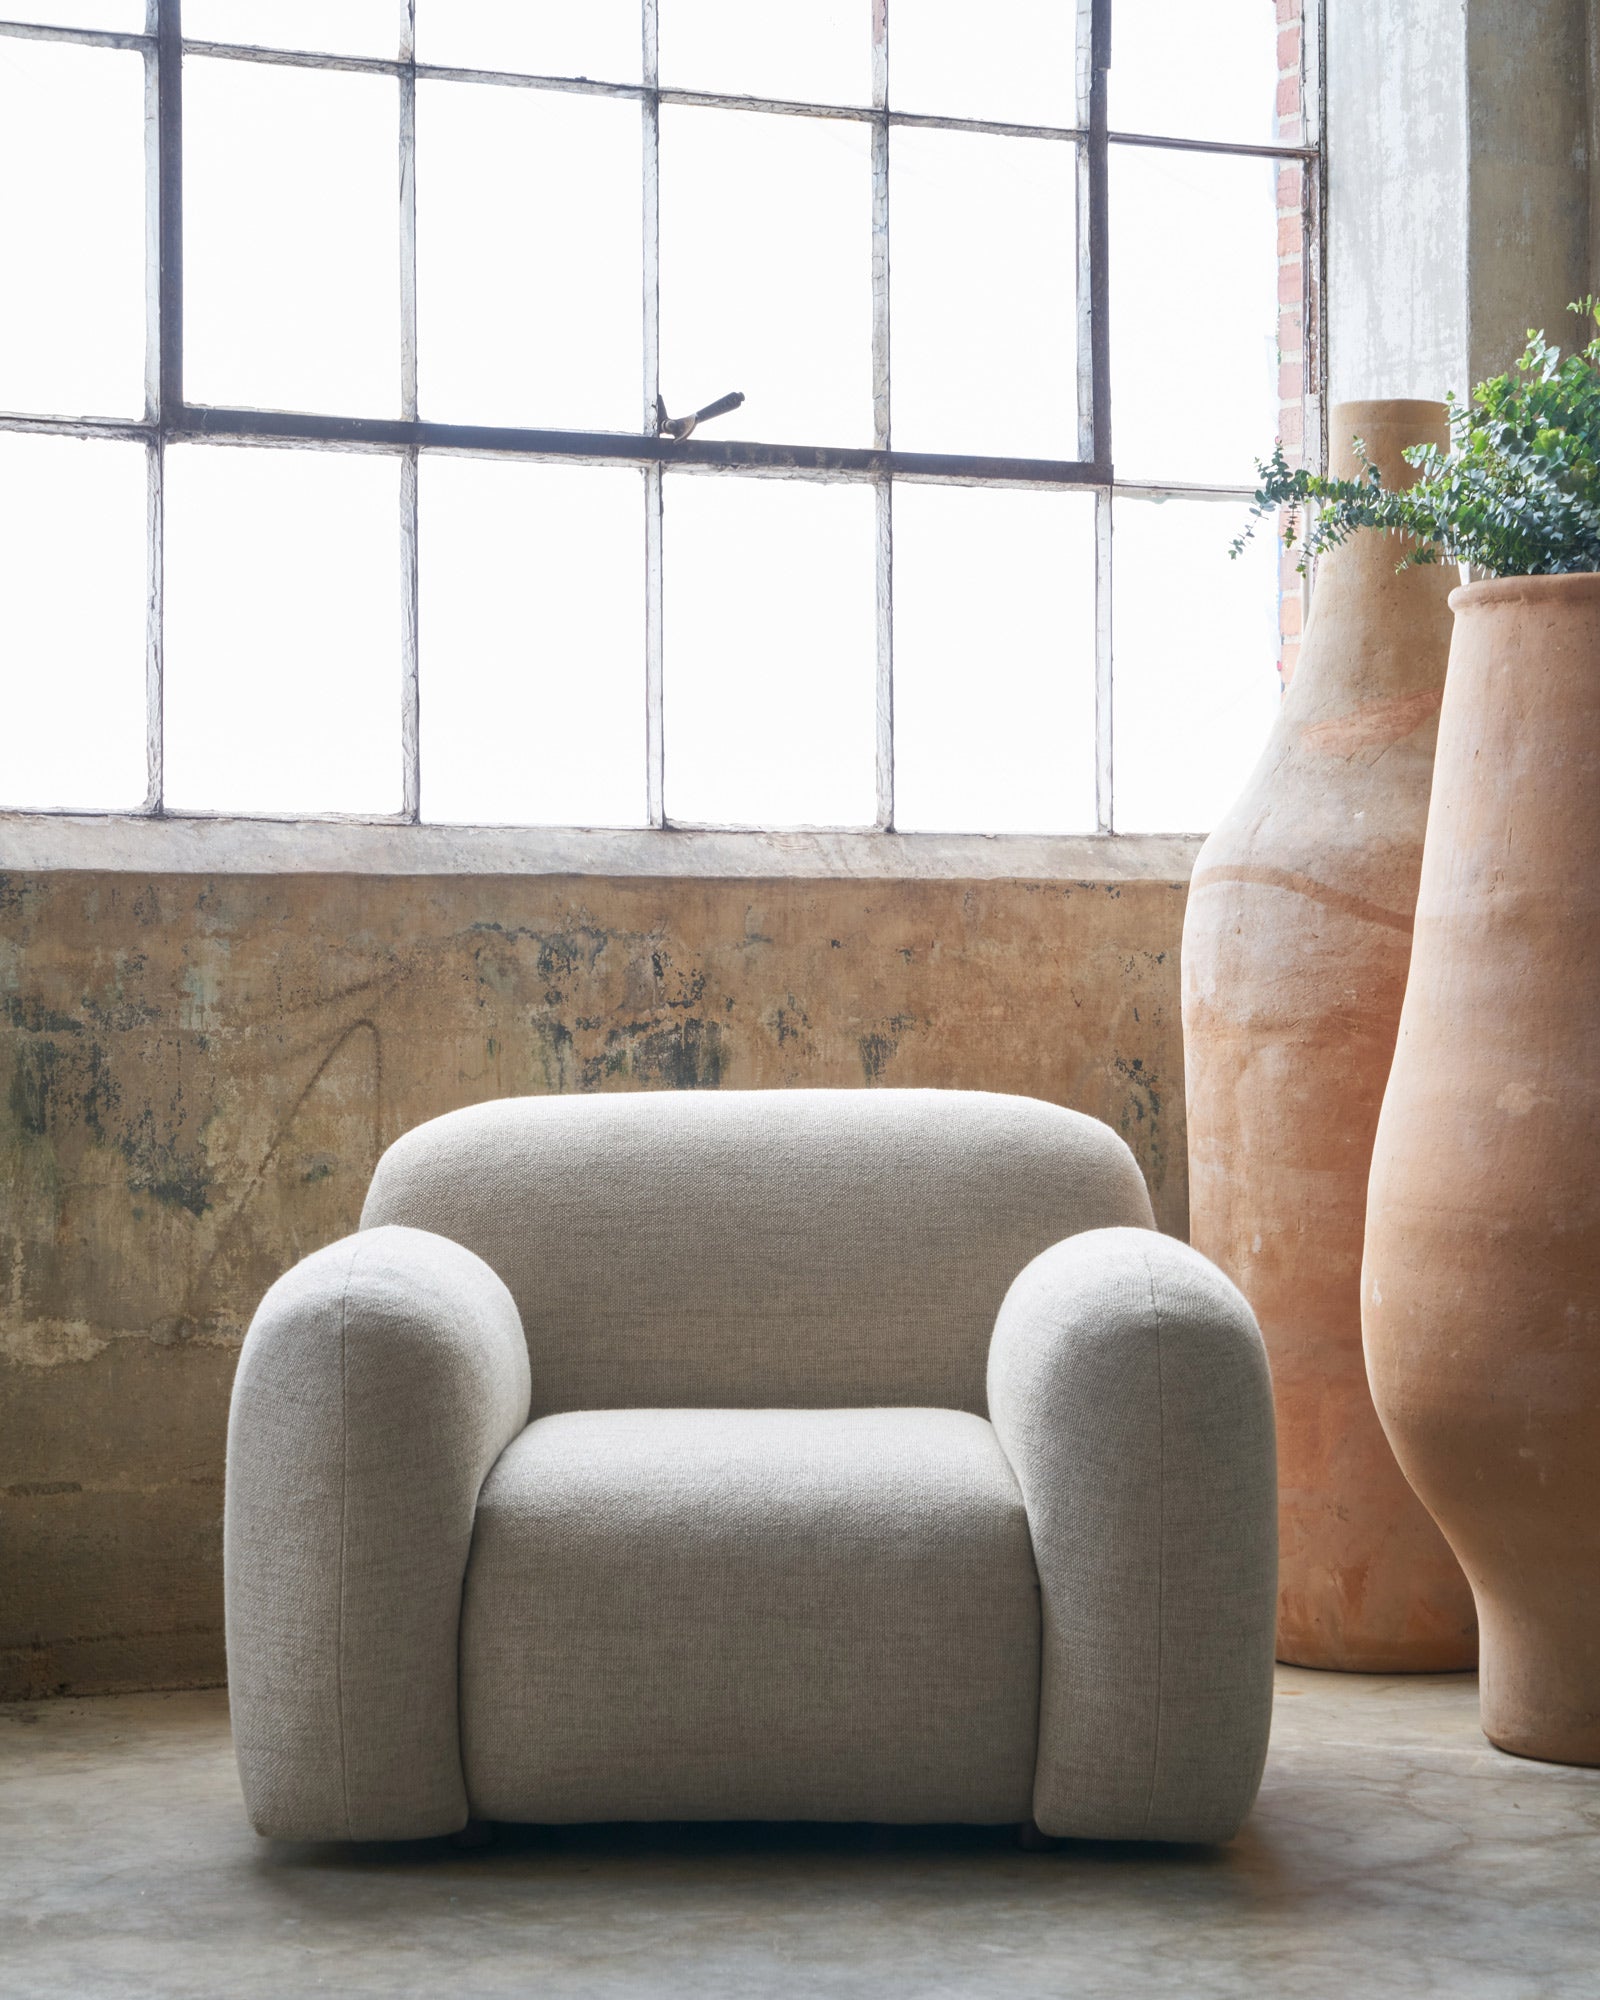  Chair in a showroom in front of a large window next to 2 tall terracotta pots. Photographed in Bellamy Oatmeal. 